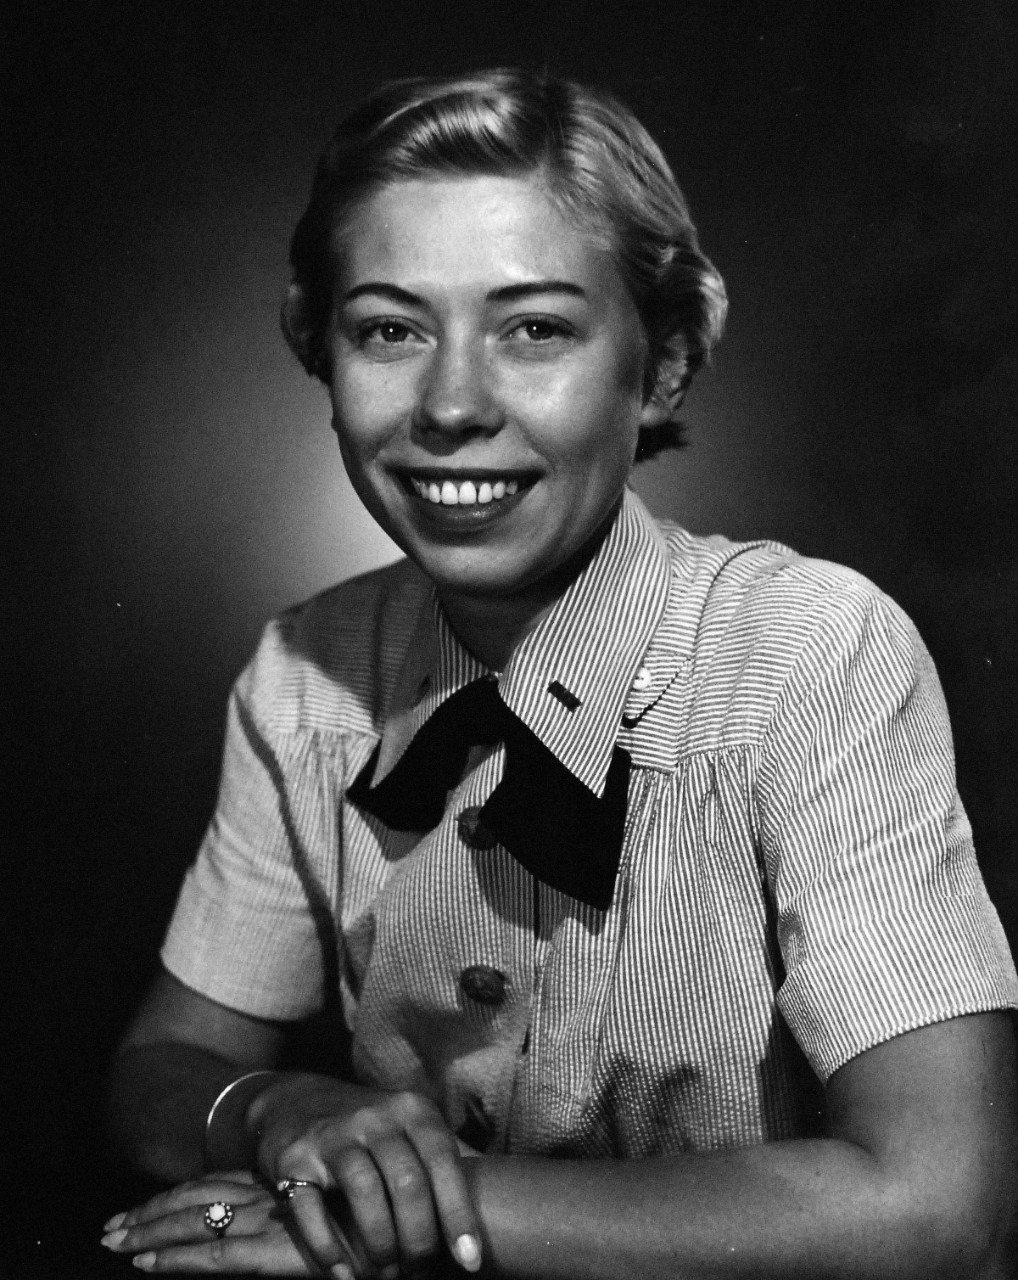 USN 639979:  Lieutenant Junior Grade Eva W. Schekorra, USN, July 1954.  Schekorra was the first U.S. Navy female officer assigned duty to Rome, Italy, July 1954.    Master Caption:   U.S. Navy to Send Woman Officer to Attache Duty in Rome.  The First woman officer assigned to duty in Rome, Italy, by the Navy is Lieutenant Junior Grade Eva W. Schekorra, USN.    She served as communications officer in the office of the Naval Attache.    Schekorra graduated from the College of Saint Teresa in Kansas City in 1947 and served in the active Navy since October 1951.   Her brother also served in the U.S. Navy during this time, Fred W. Schekorra, Jr., and was based out of Japan as a Hospital Corpsman with the Third Marine Division.  Photographed July 20, 1954.  Official U.S. Navy photograph, now in the collections of the National Archives.   